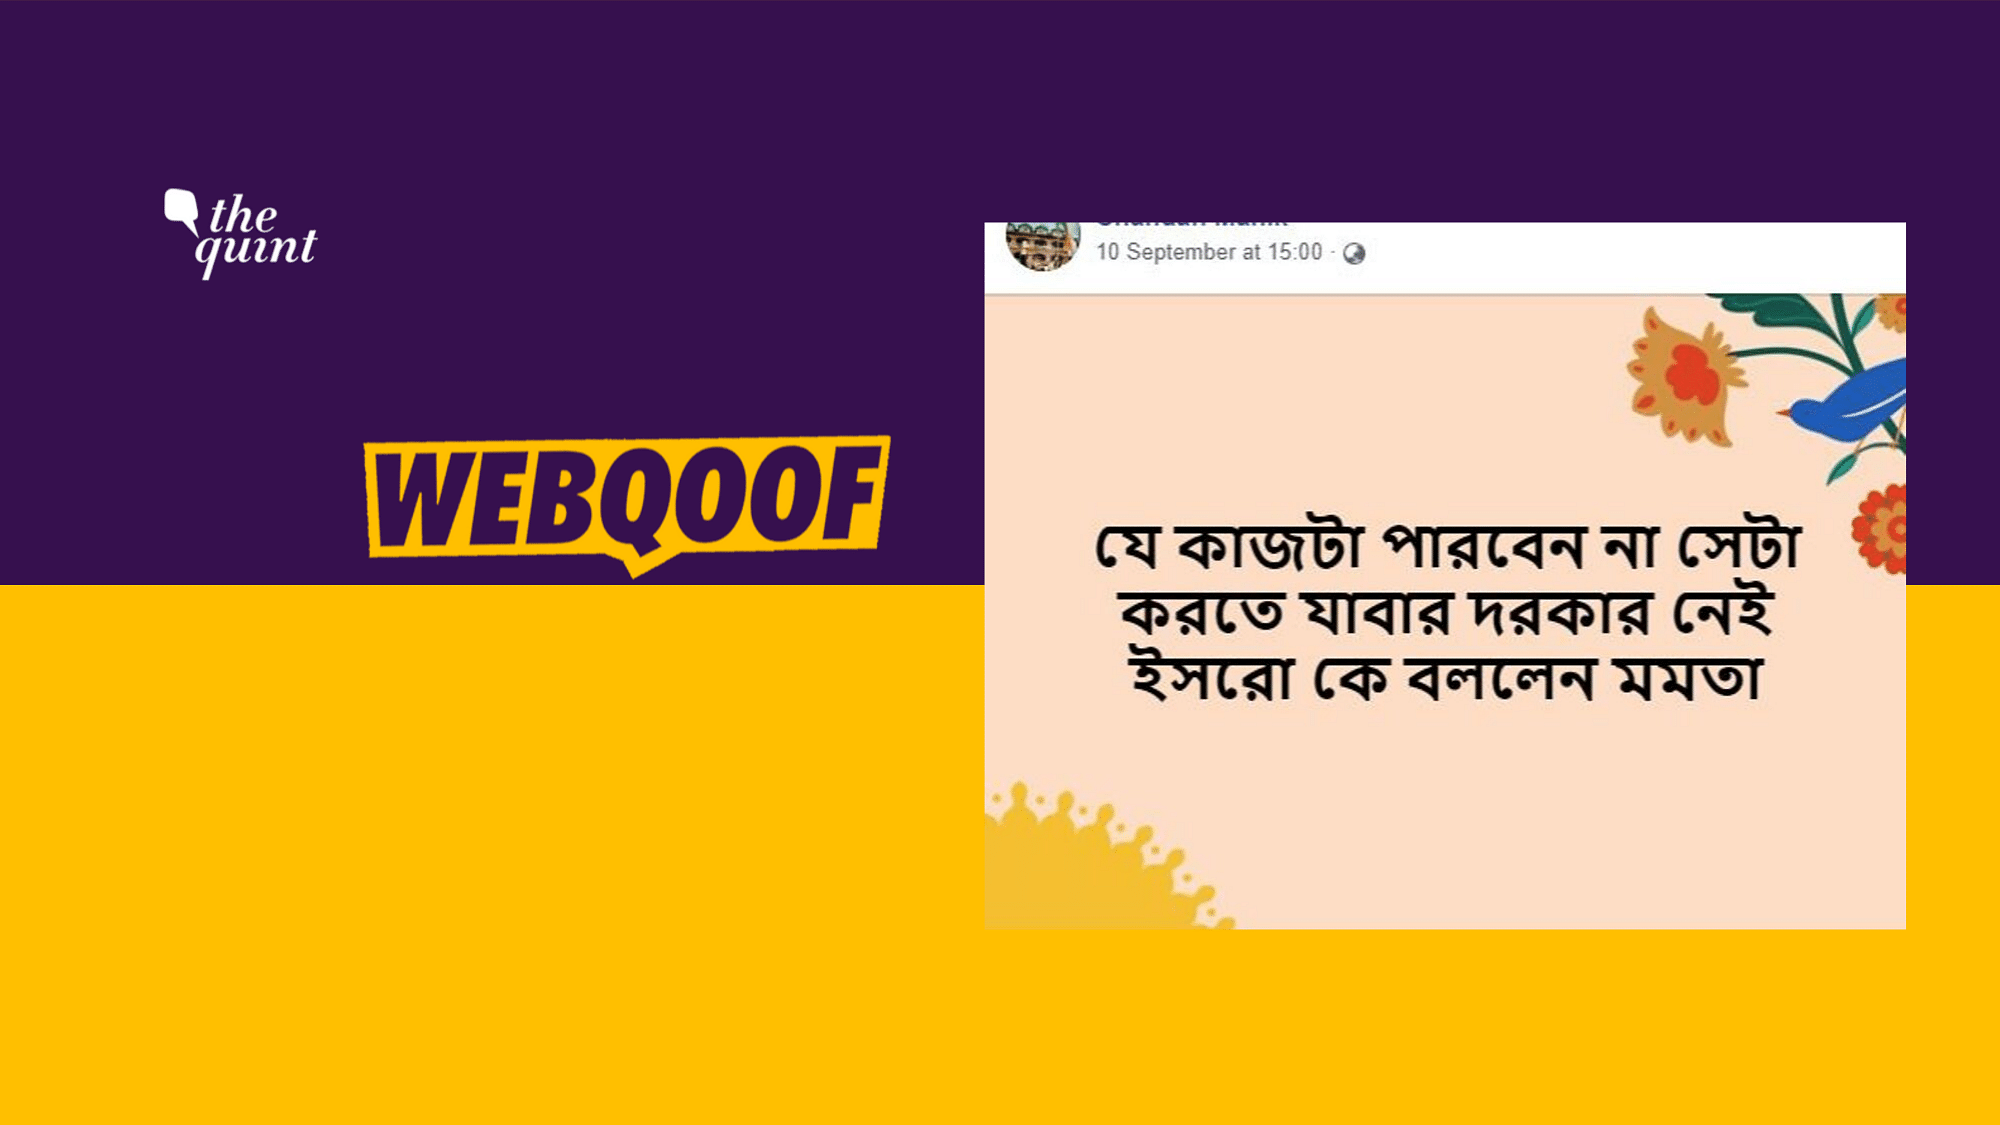 The message says that West Bengal Chief Minister Mamata Banerjee criticised ISRO harshly after they lost communication with Chandrayaan-2’s Vikram lander.